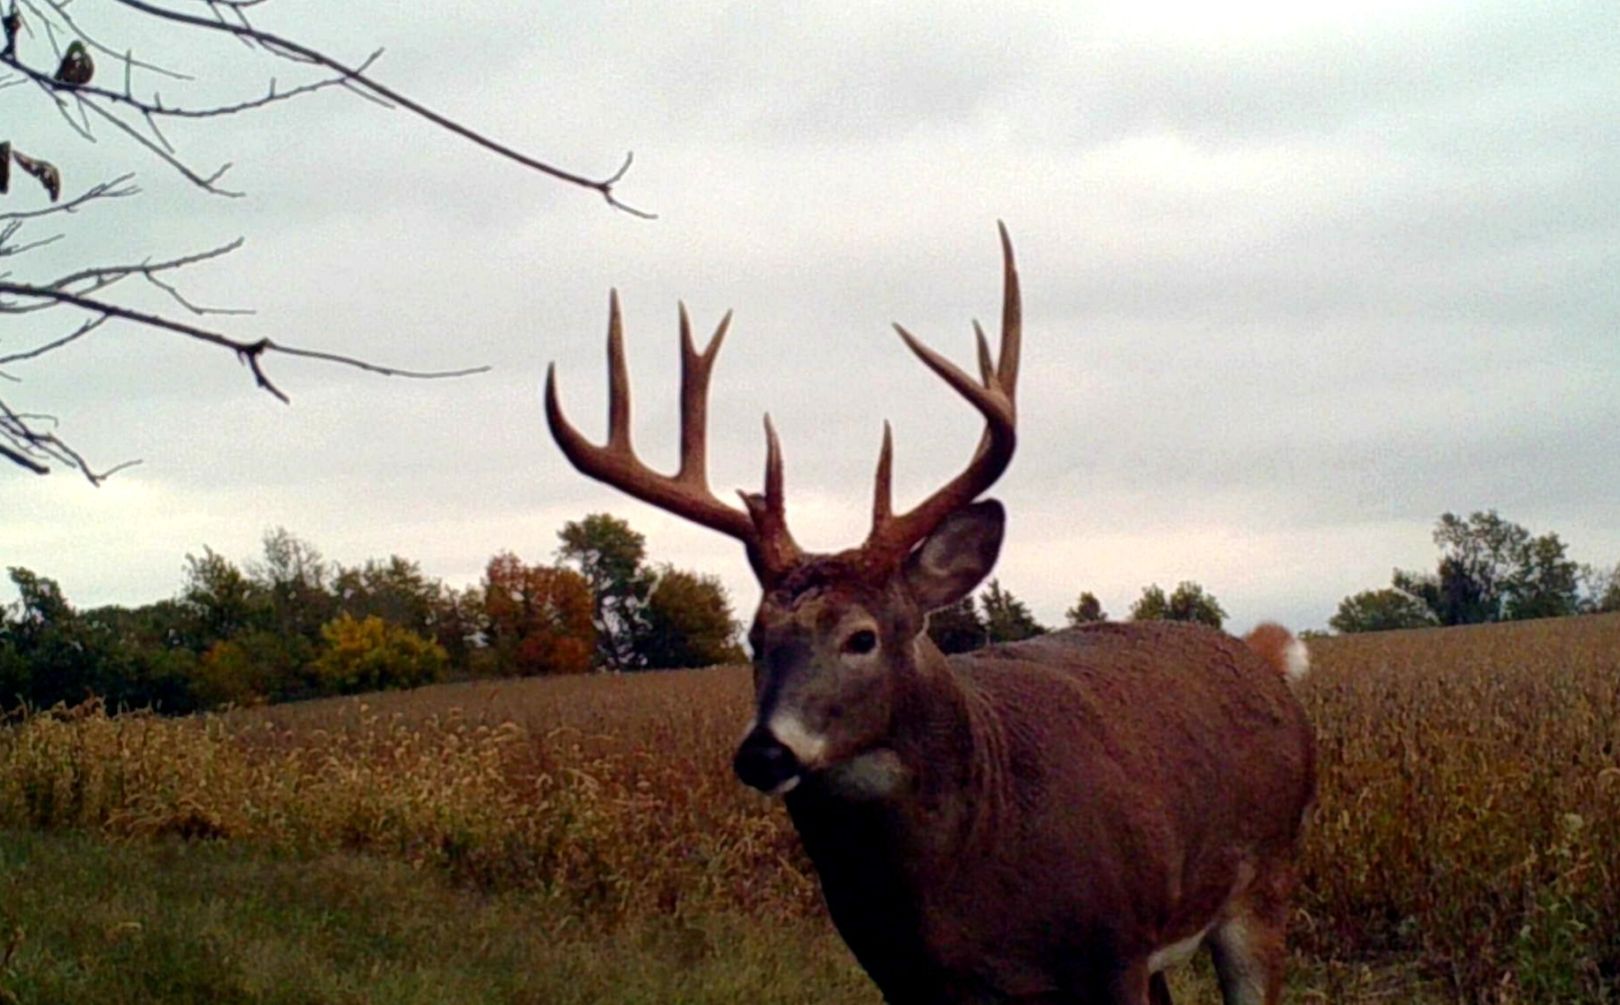 rut started yet